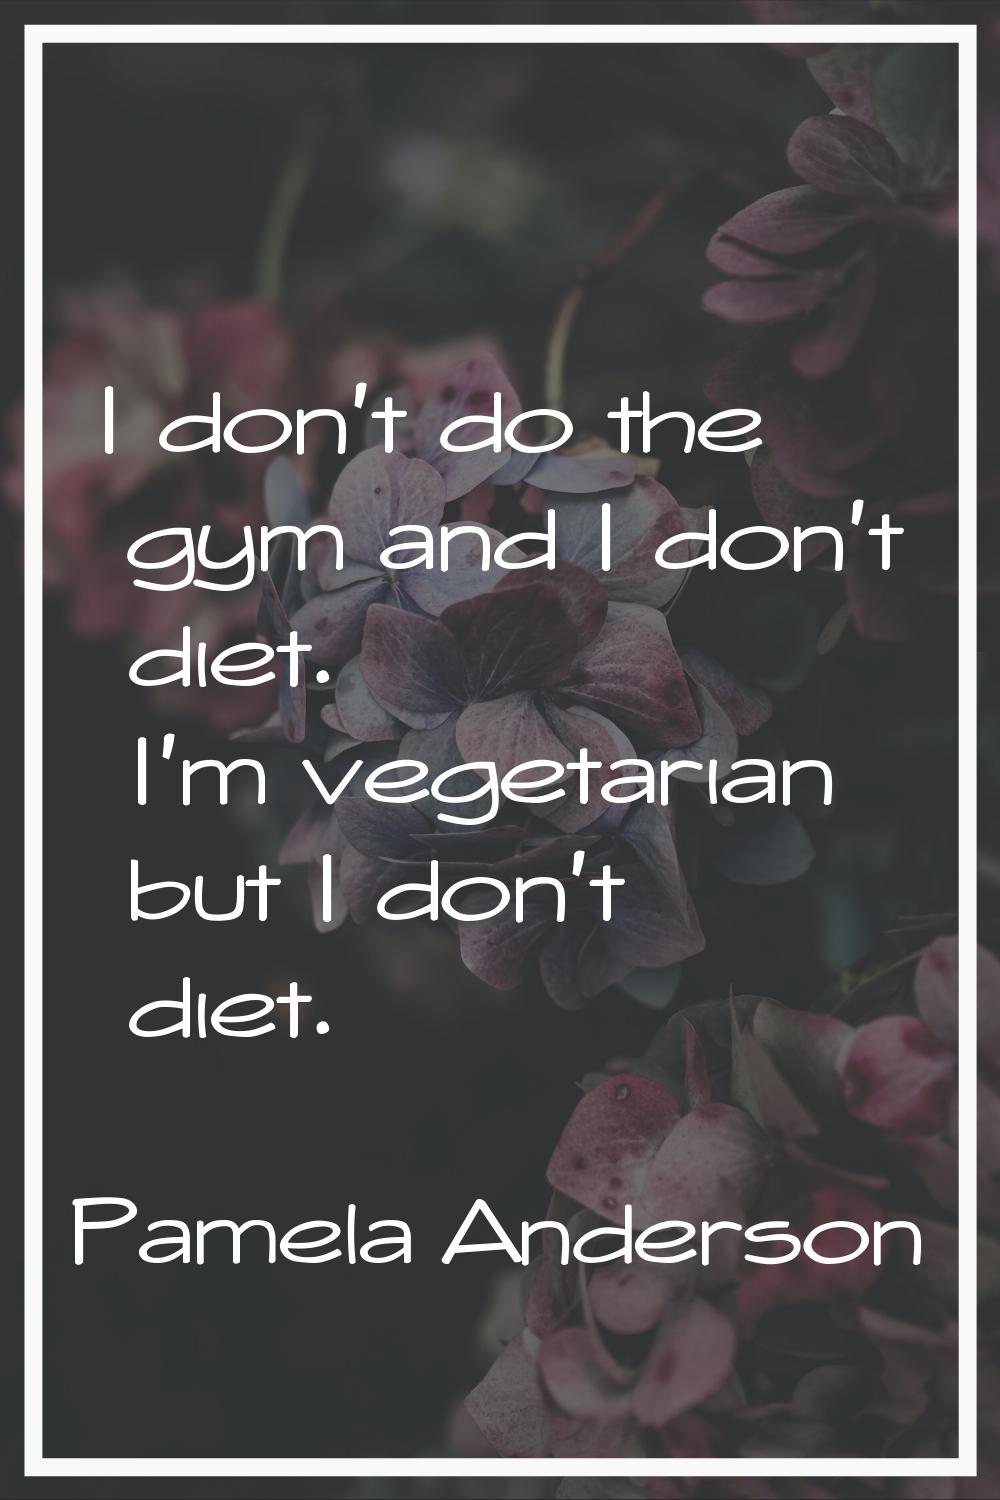 I don't do the gym and I don't diet. I'm vegetarian but I don't diet.